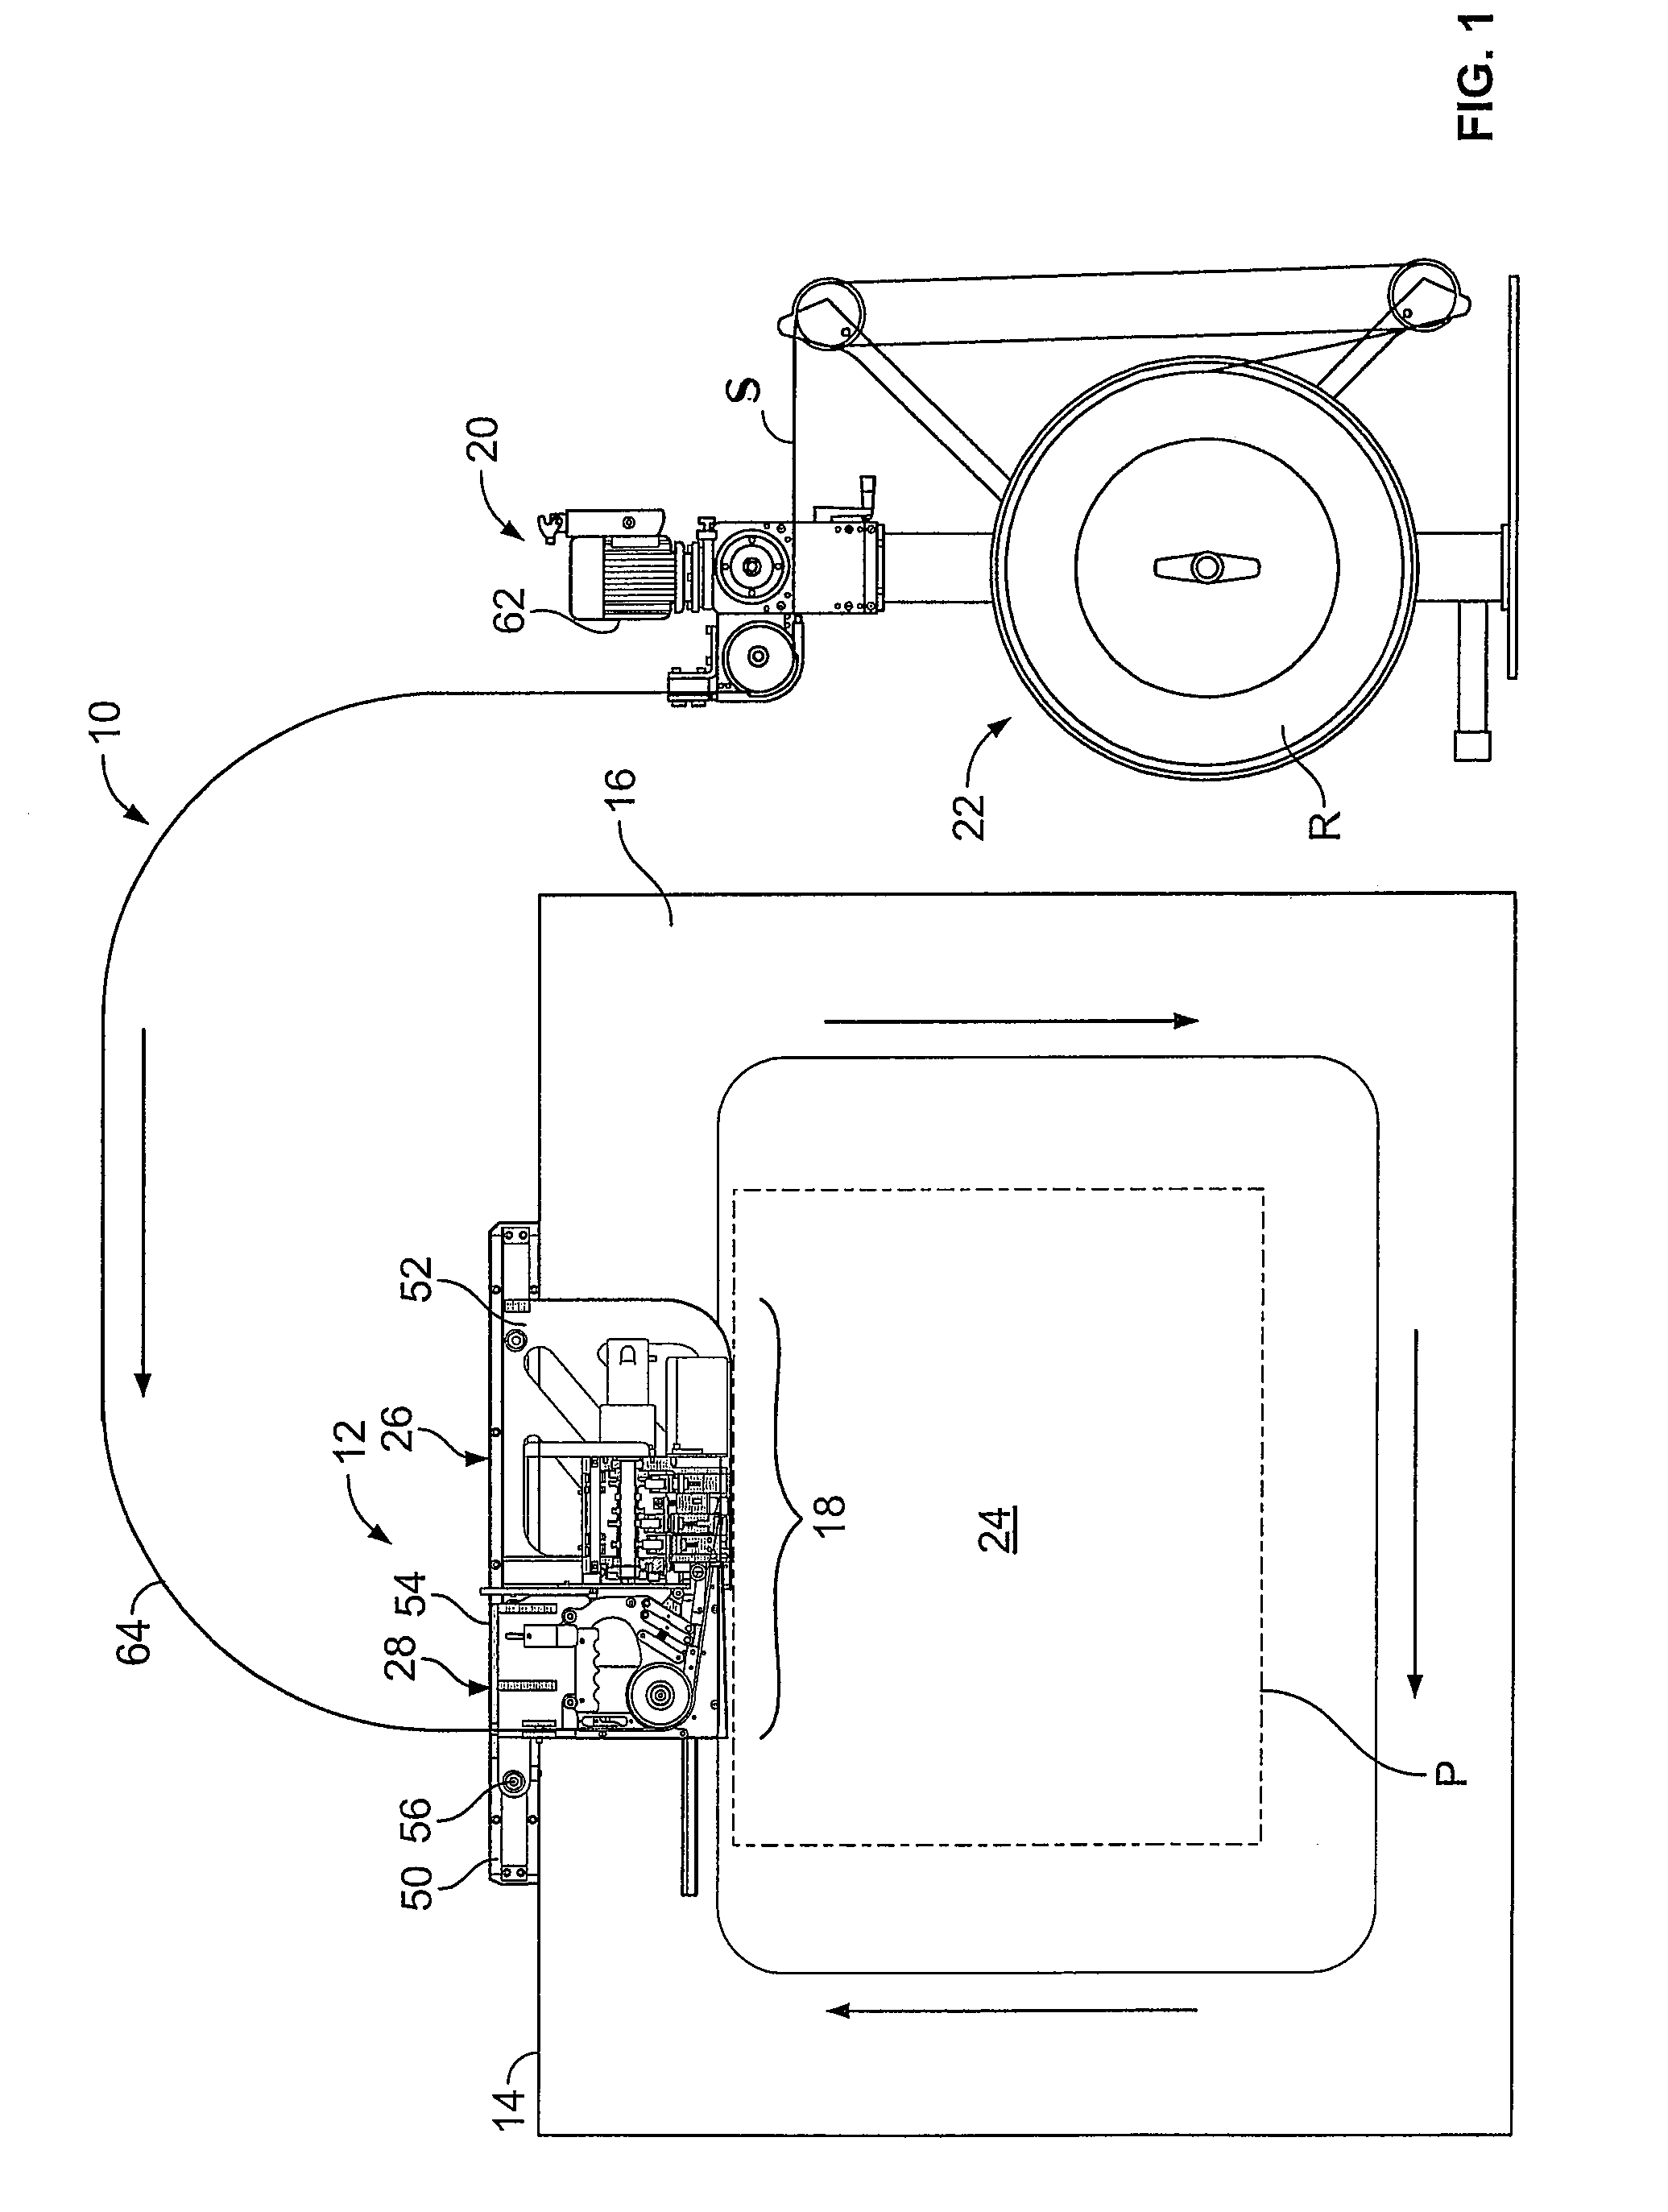 Strapping machine with improved tension, seal and feed arrangement